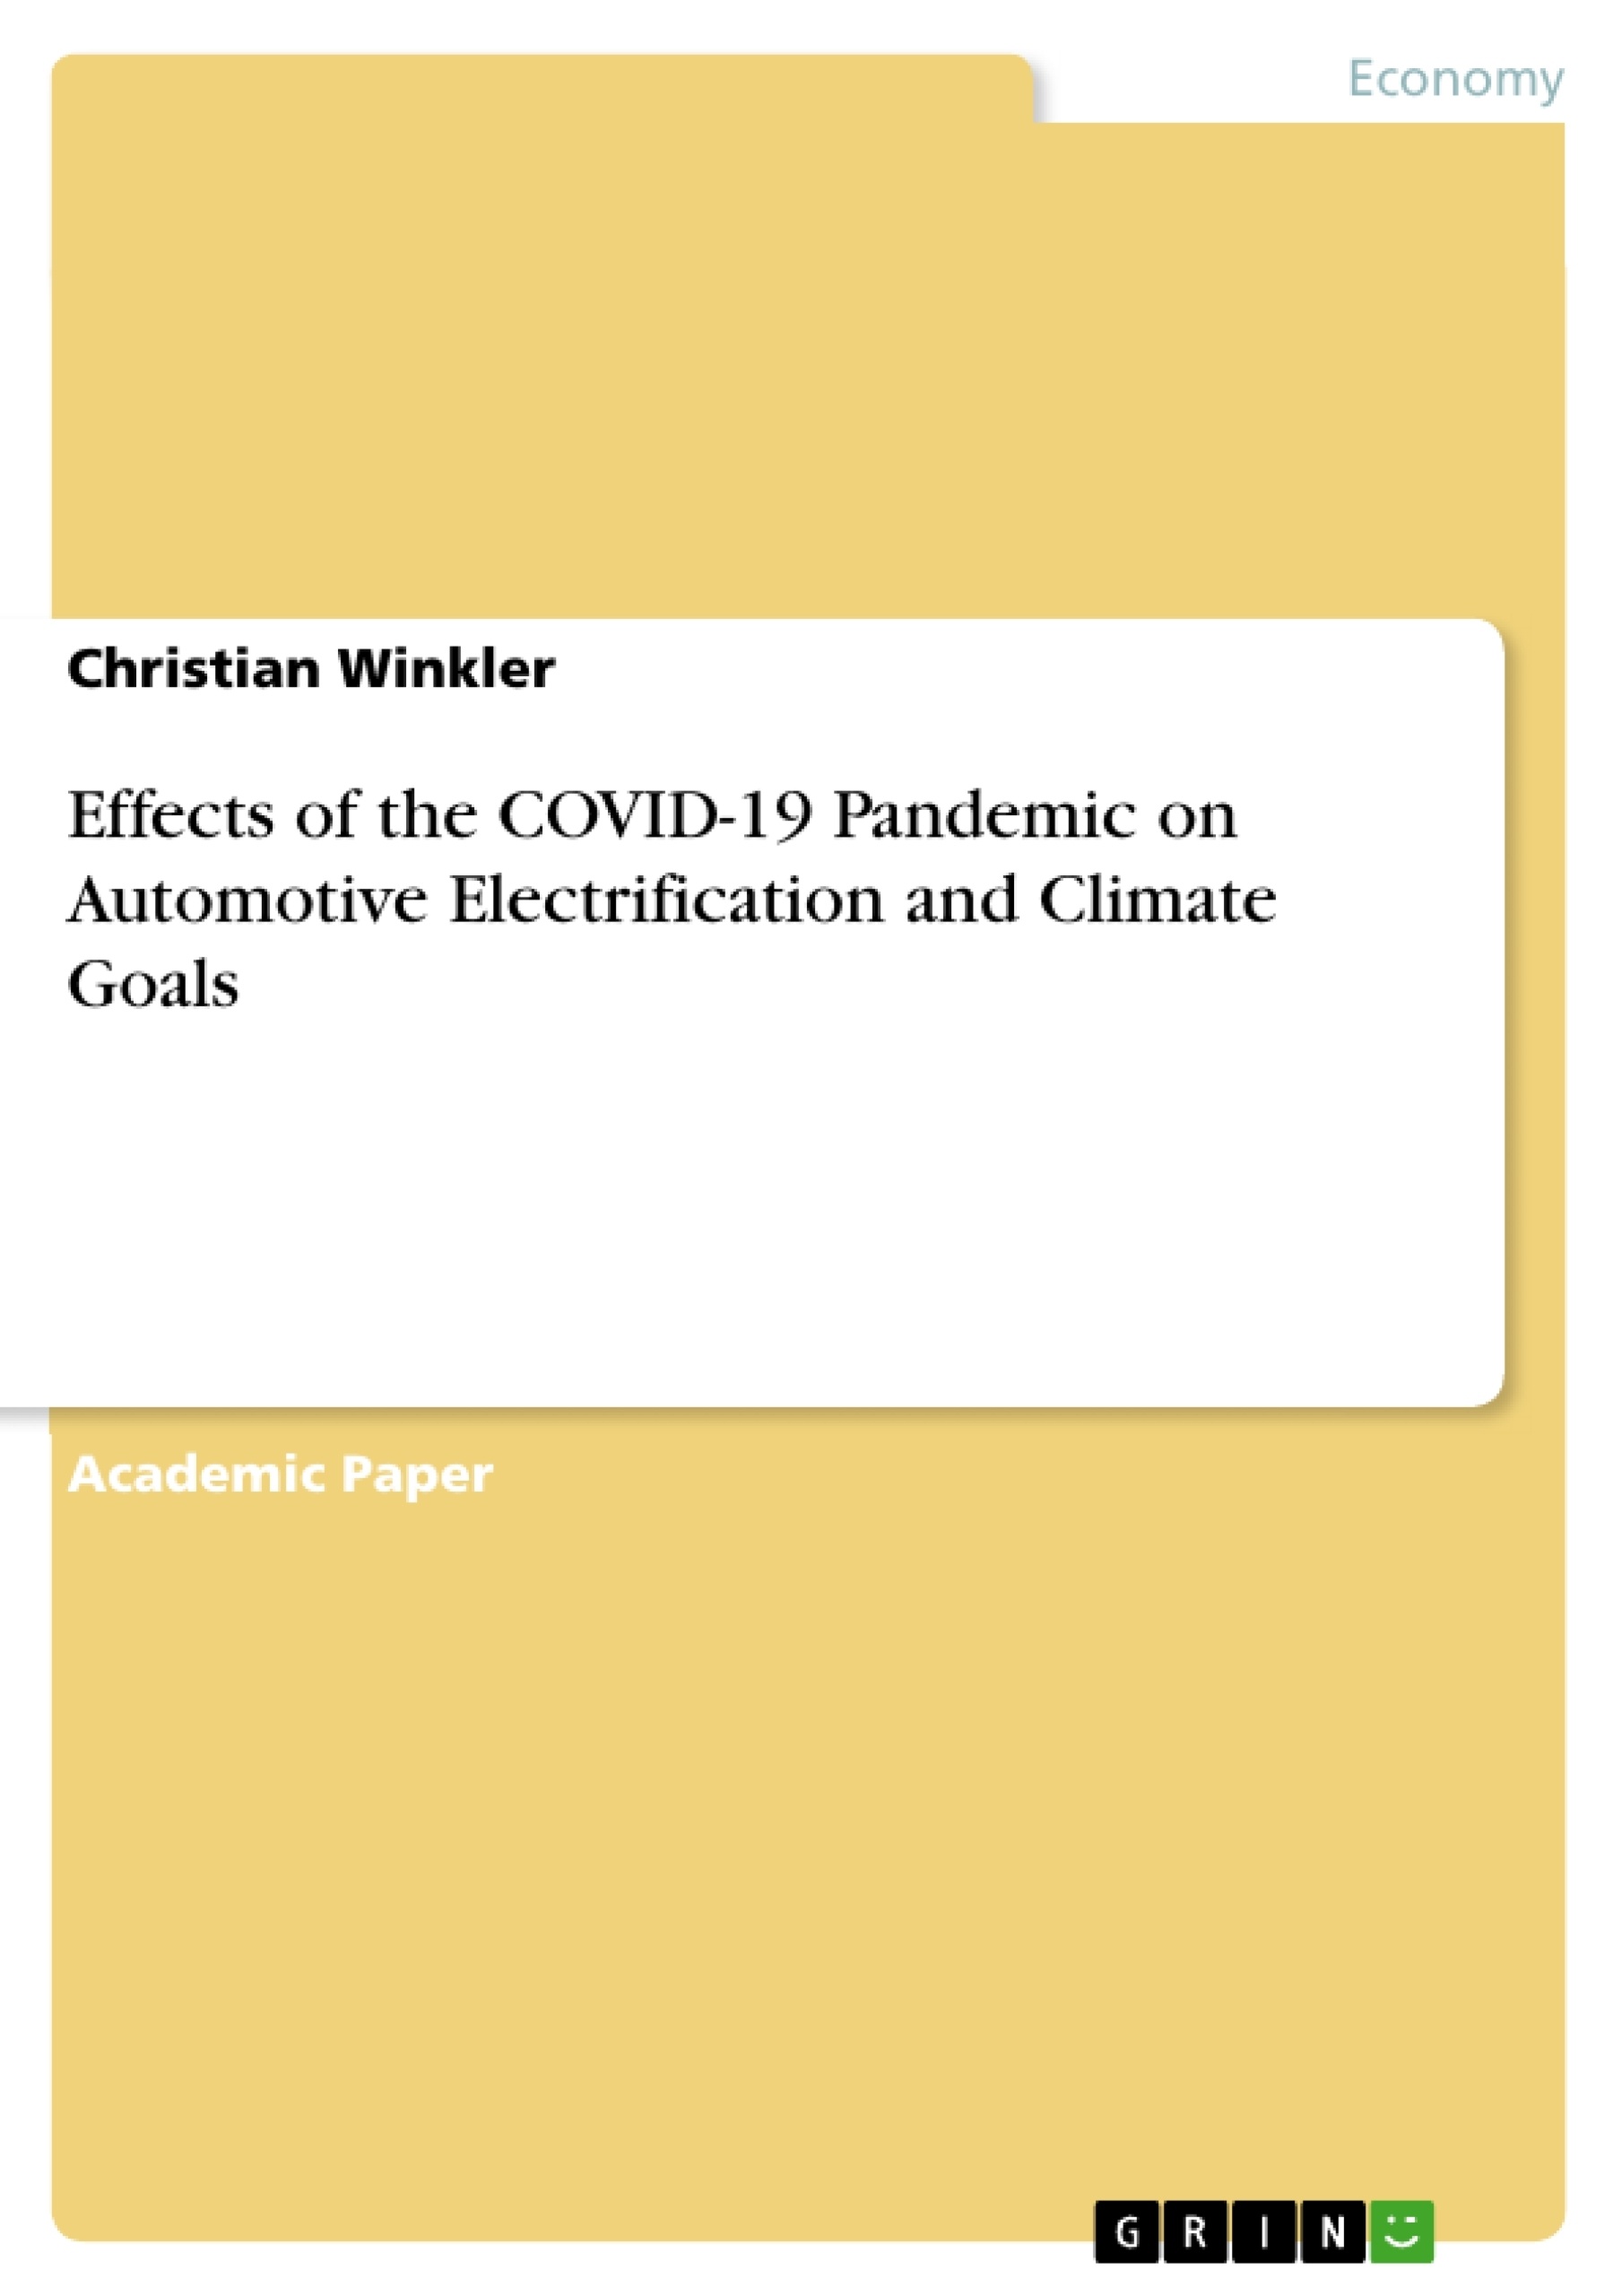 Titre: Effects of the COVID-19 Pandemic on Automotive Electrification and Climate Goals